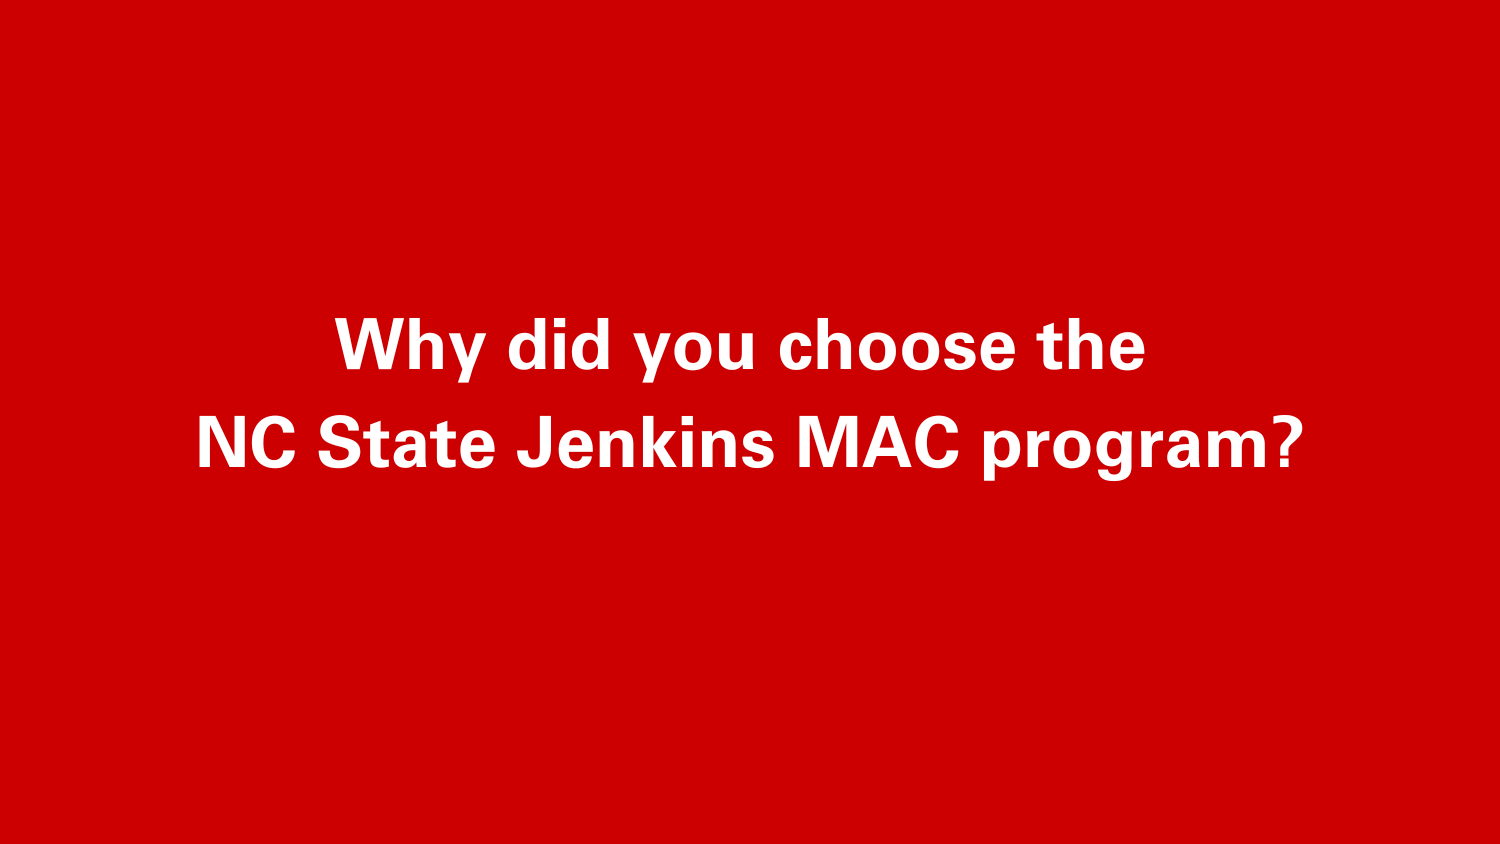 Why did you choose the NC State Jenkins MAC Program?